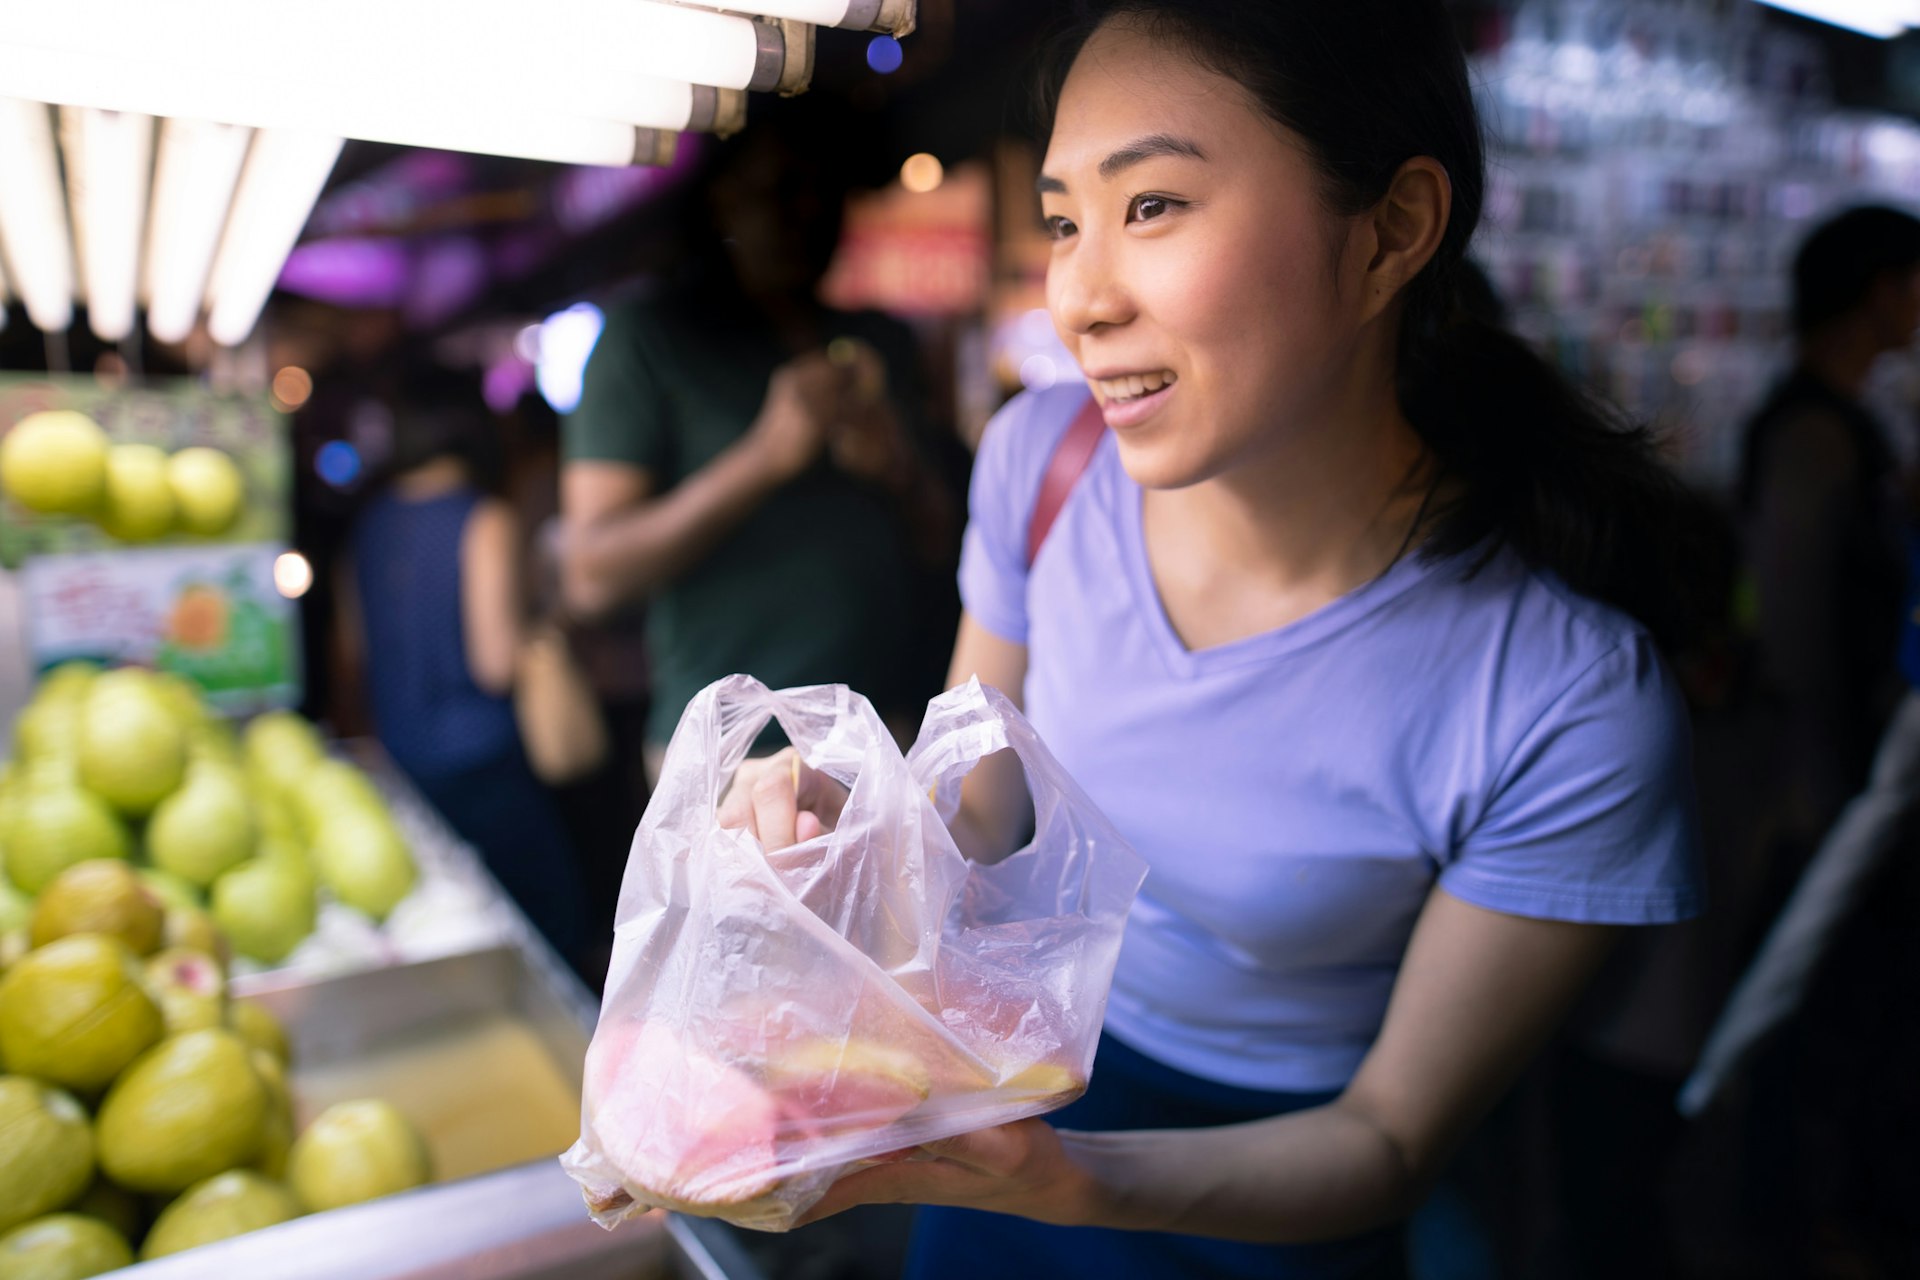 A smiling woman buys guava fruit at a street market, Taiwan